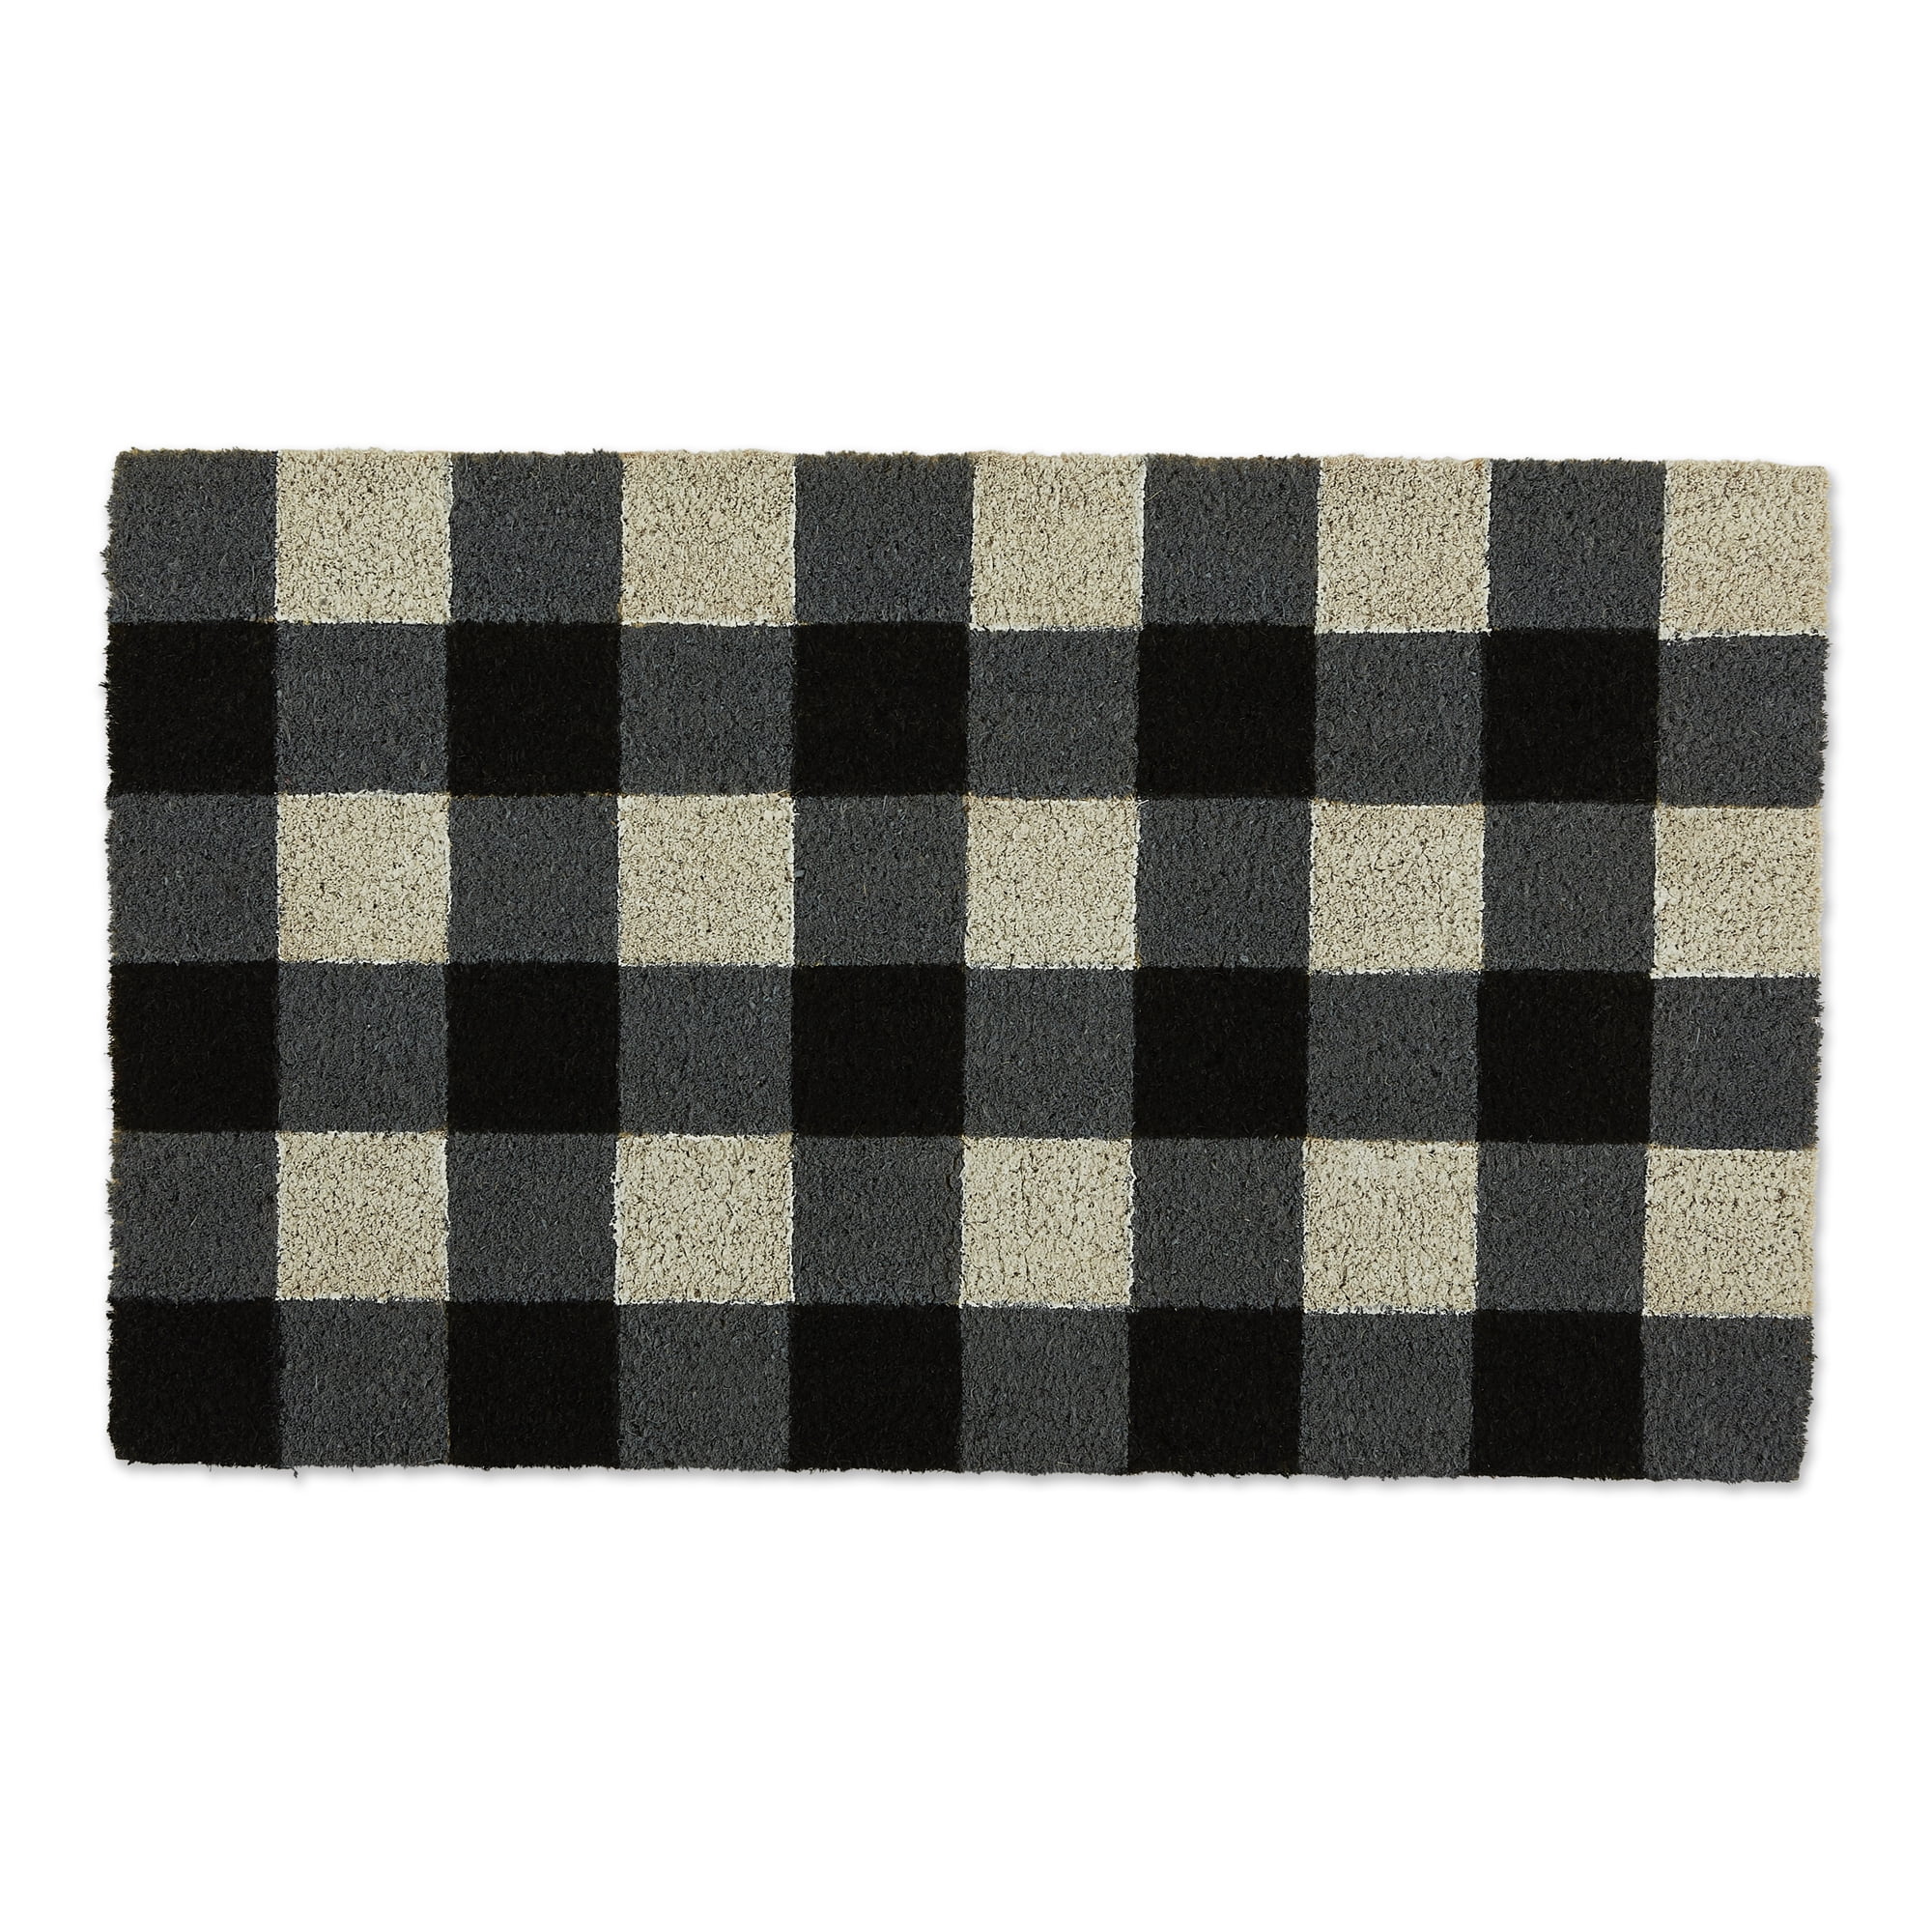 Briarwood Lane Red Checkered Welcome Coir Doormat Natural Fiber Black and Red Plaid 18 x 30 